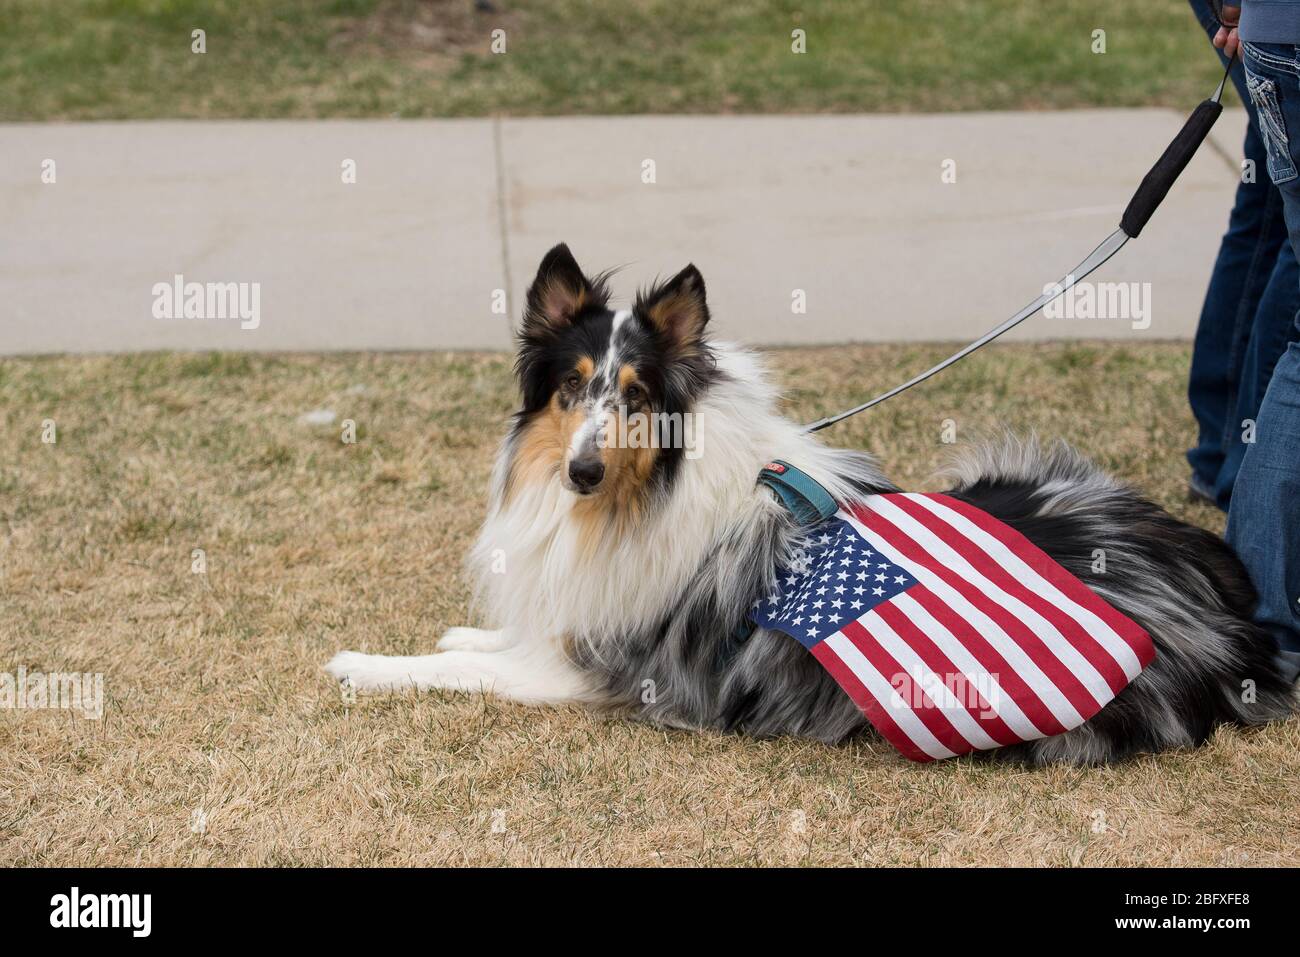 Helena, Montana - April 19, 2020: A border collie lying in the grass with an american flag on its back at a protest at the Capitol over the shutdown d Stock Photo